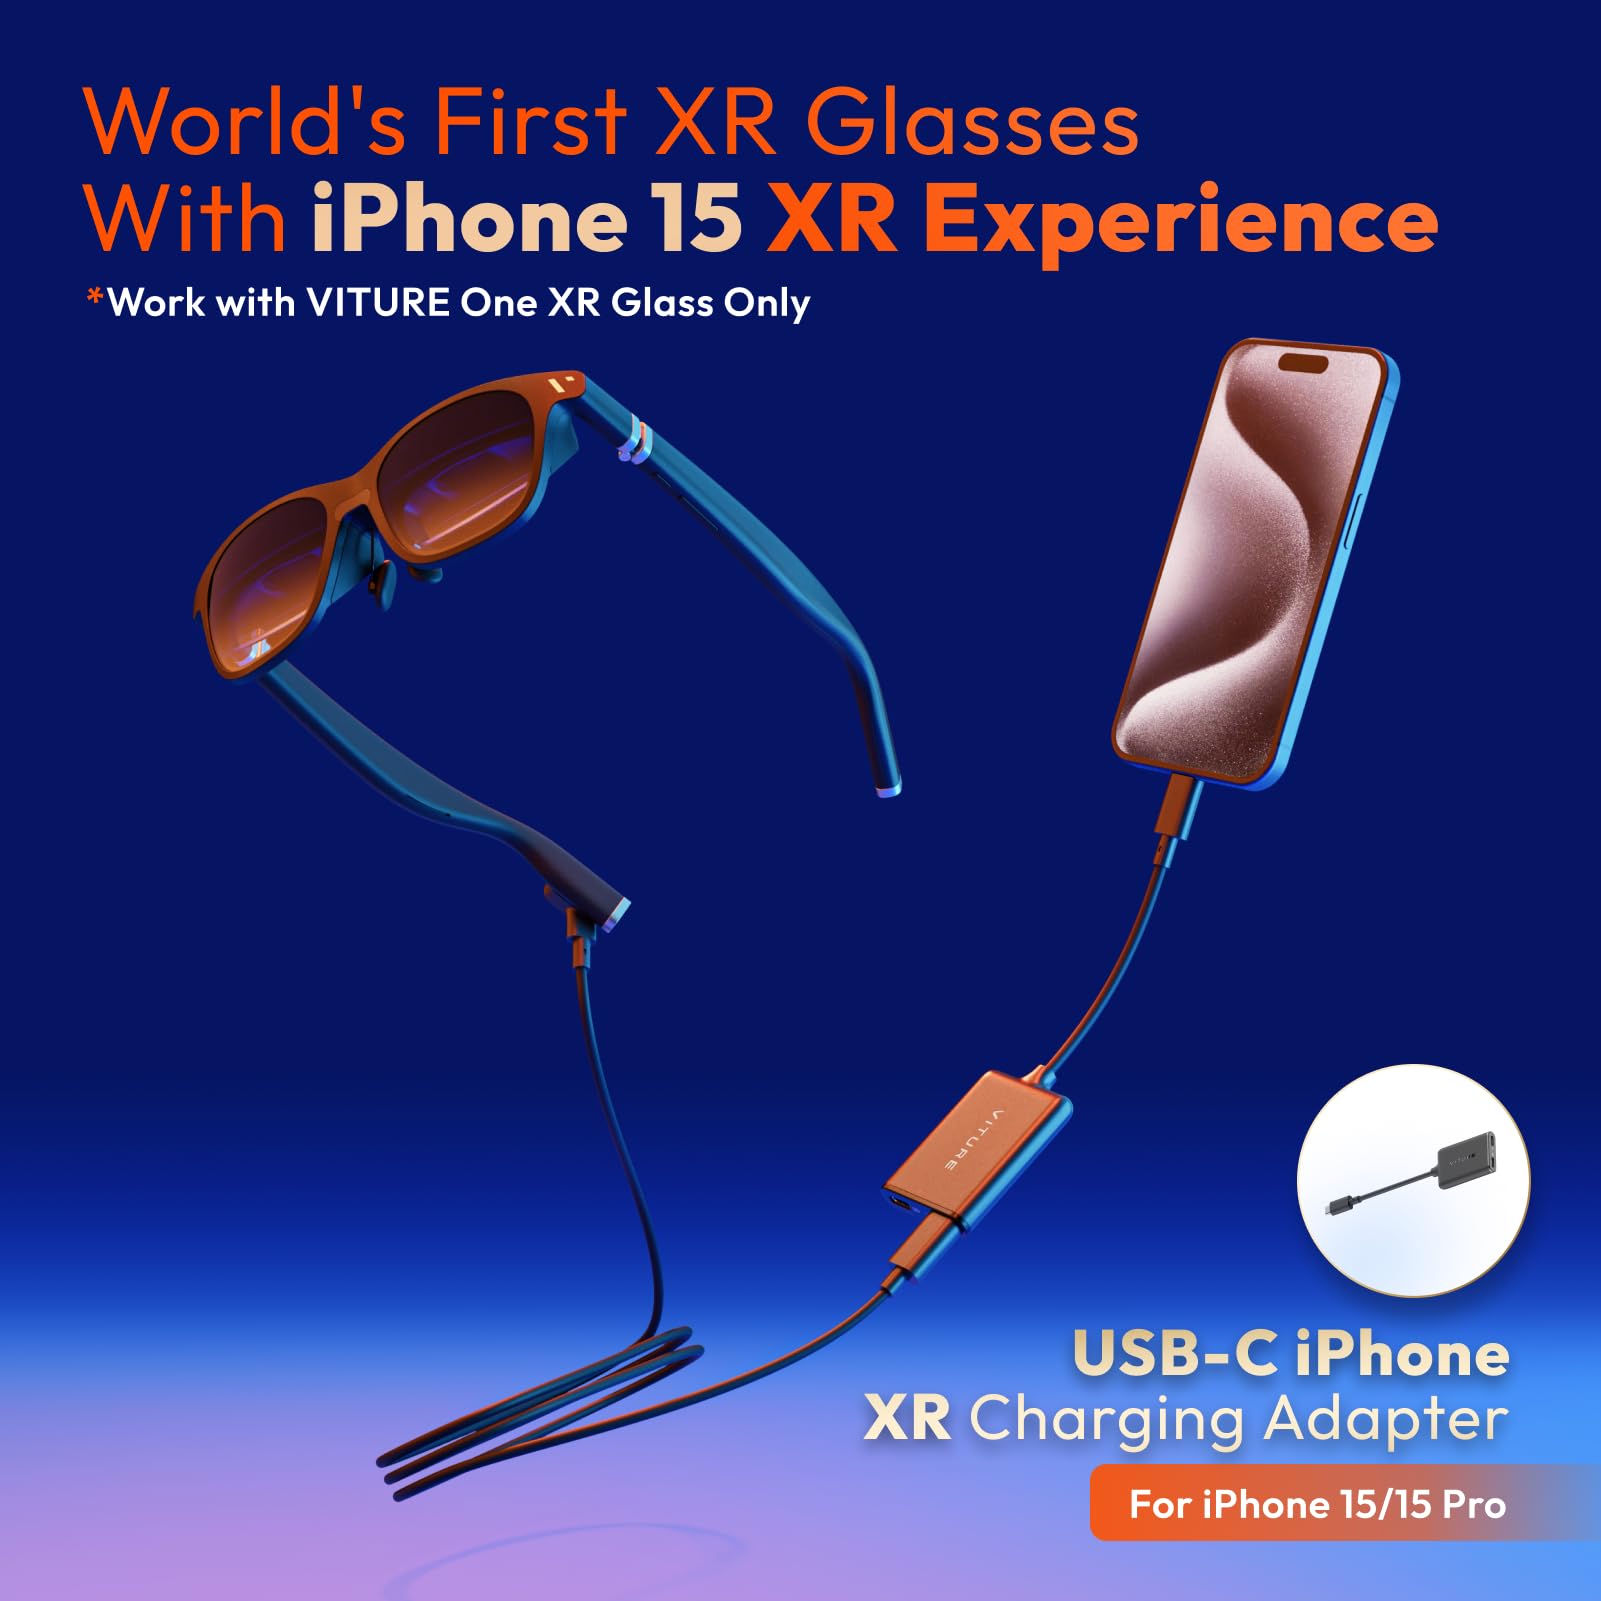 VITURE One iPhone 15 Pack: XR Glasses & USB- C iPhone XR Charging Adapter, Enabling Multi-Screen, Enhanced 3DoF, Spatial 3D, VR Video Features on iPhone 15/15 Pro, Charge and Play for Other Devices